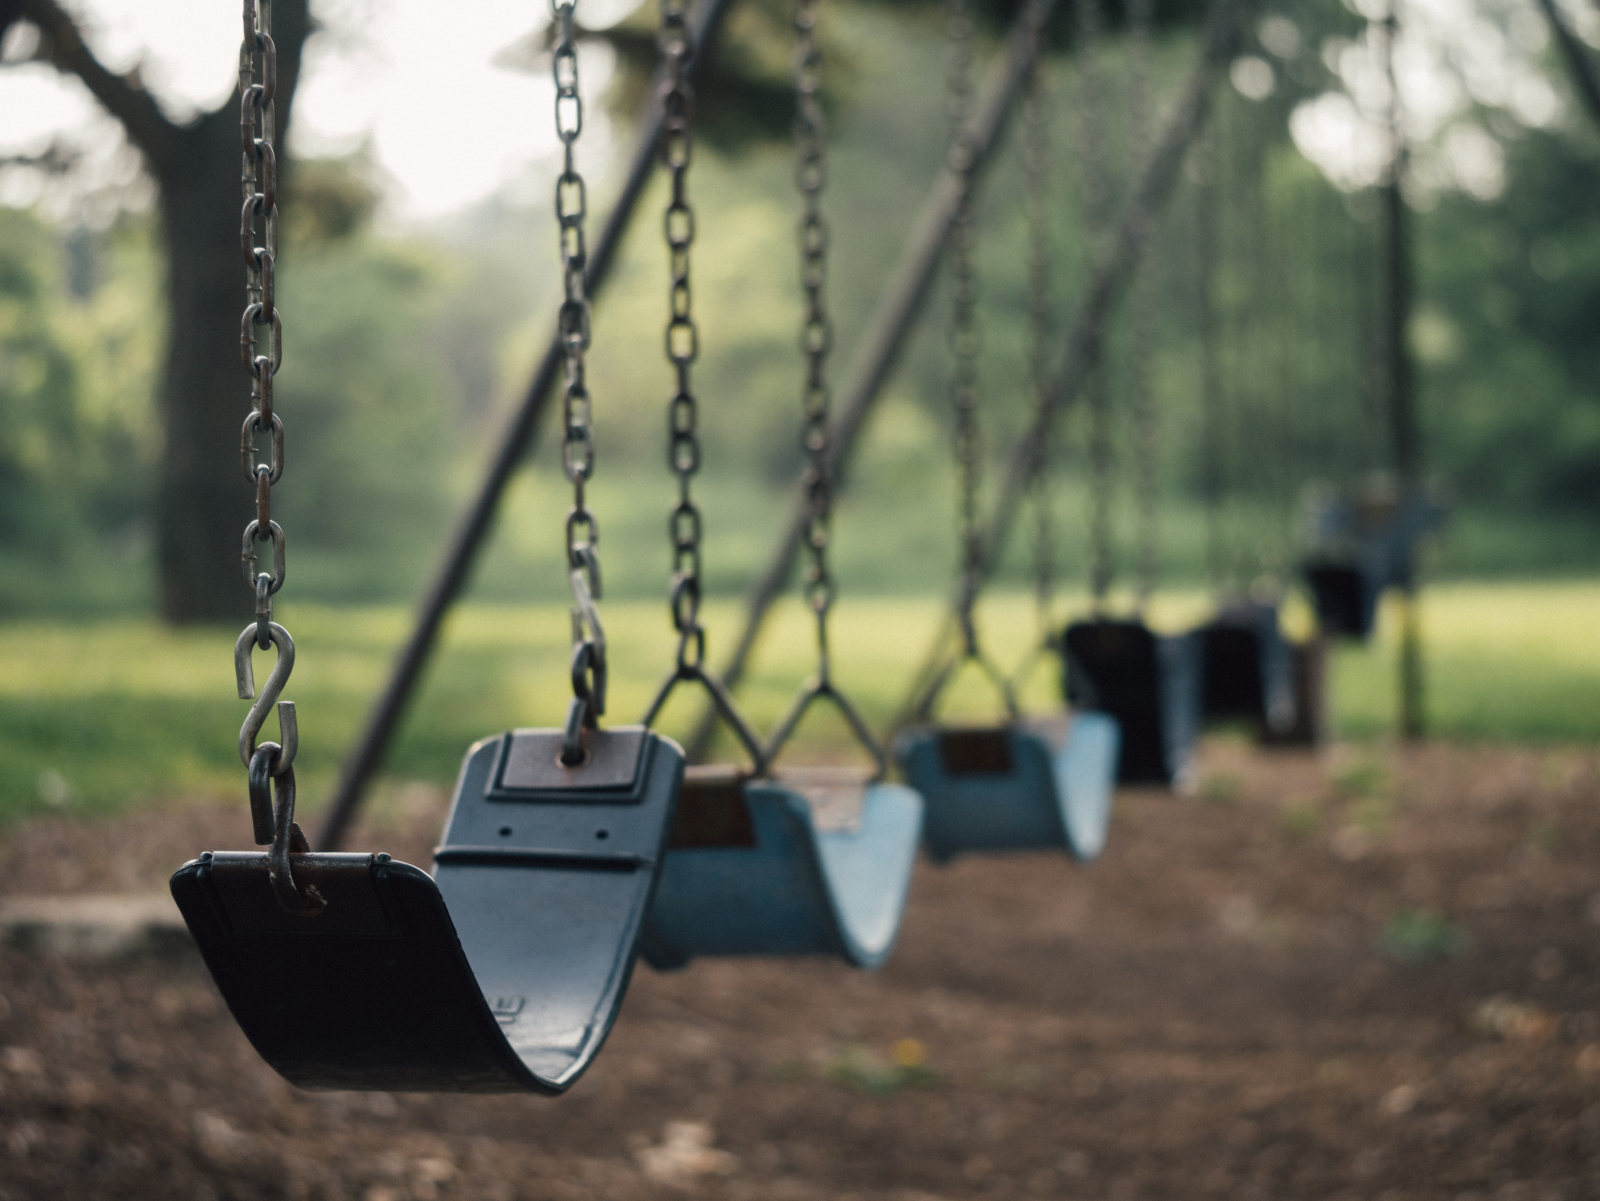 How To Get Your Local Park’s Playground Equipment Updated Or Rebuilt